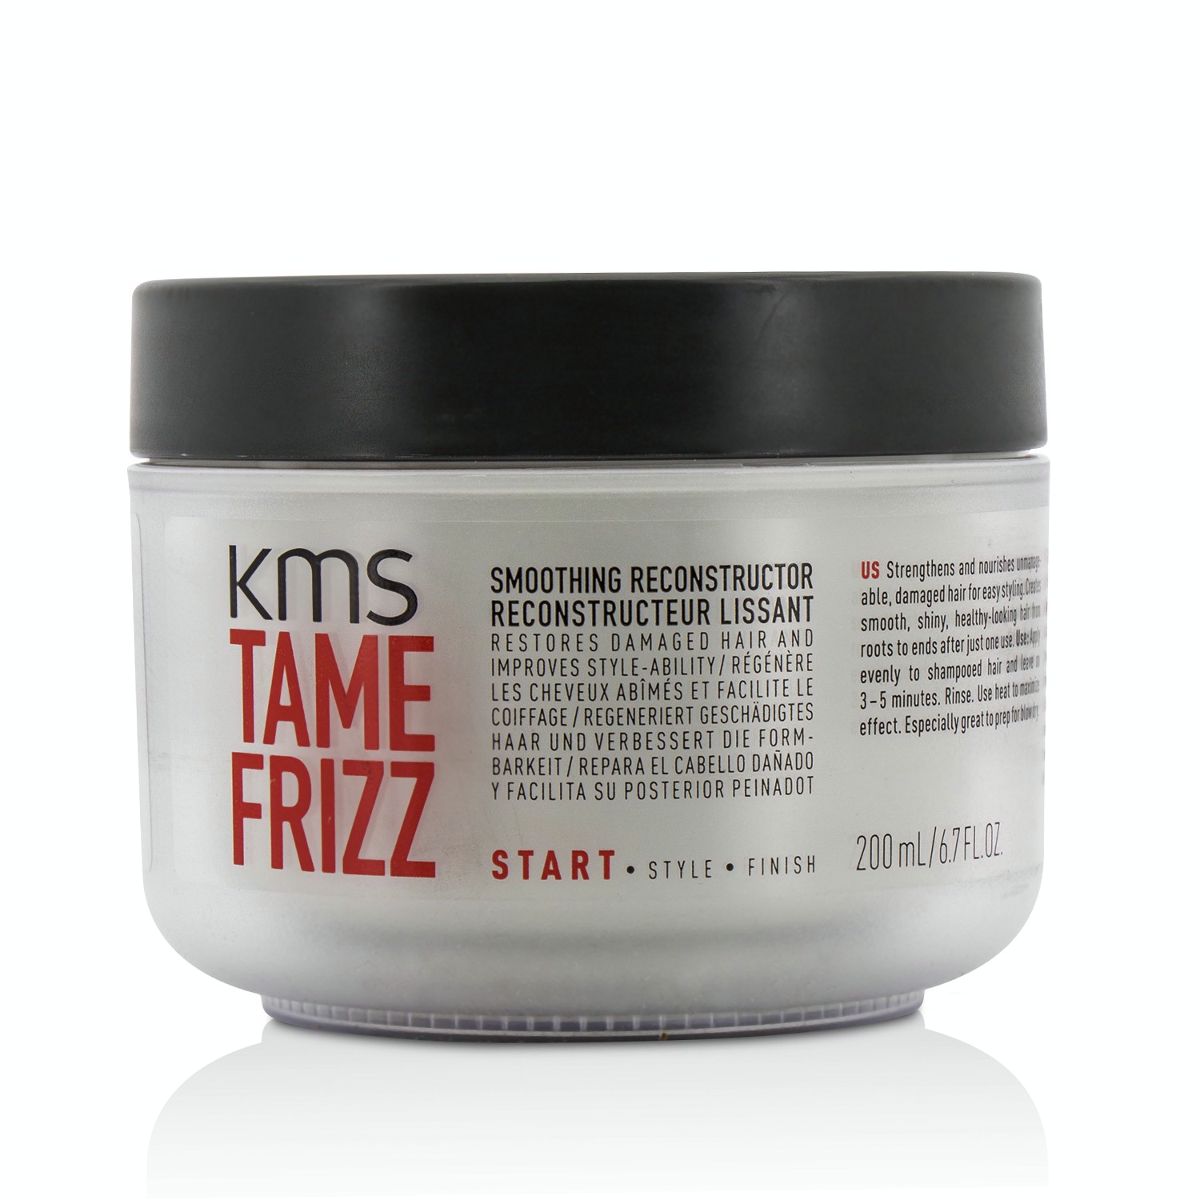 Tame Frizz Smoothing Reconstructor (Restores Damaged Hair and Improves Style-Ability) KMS California Image